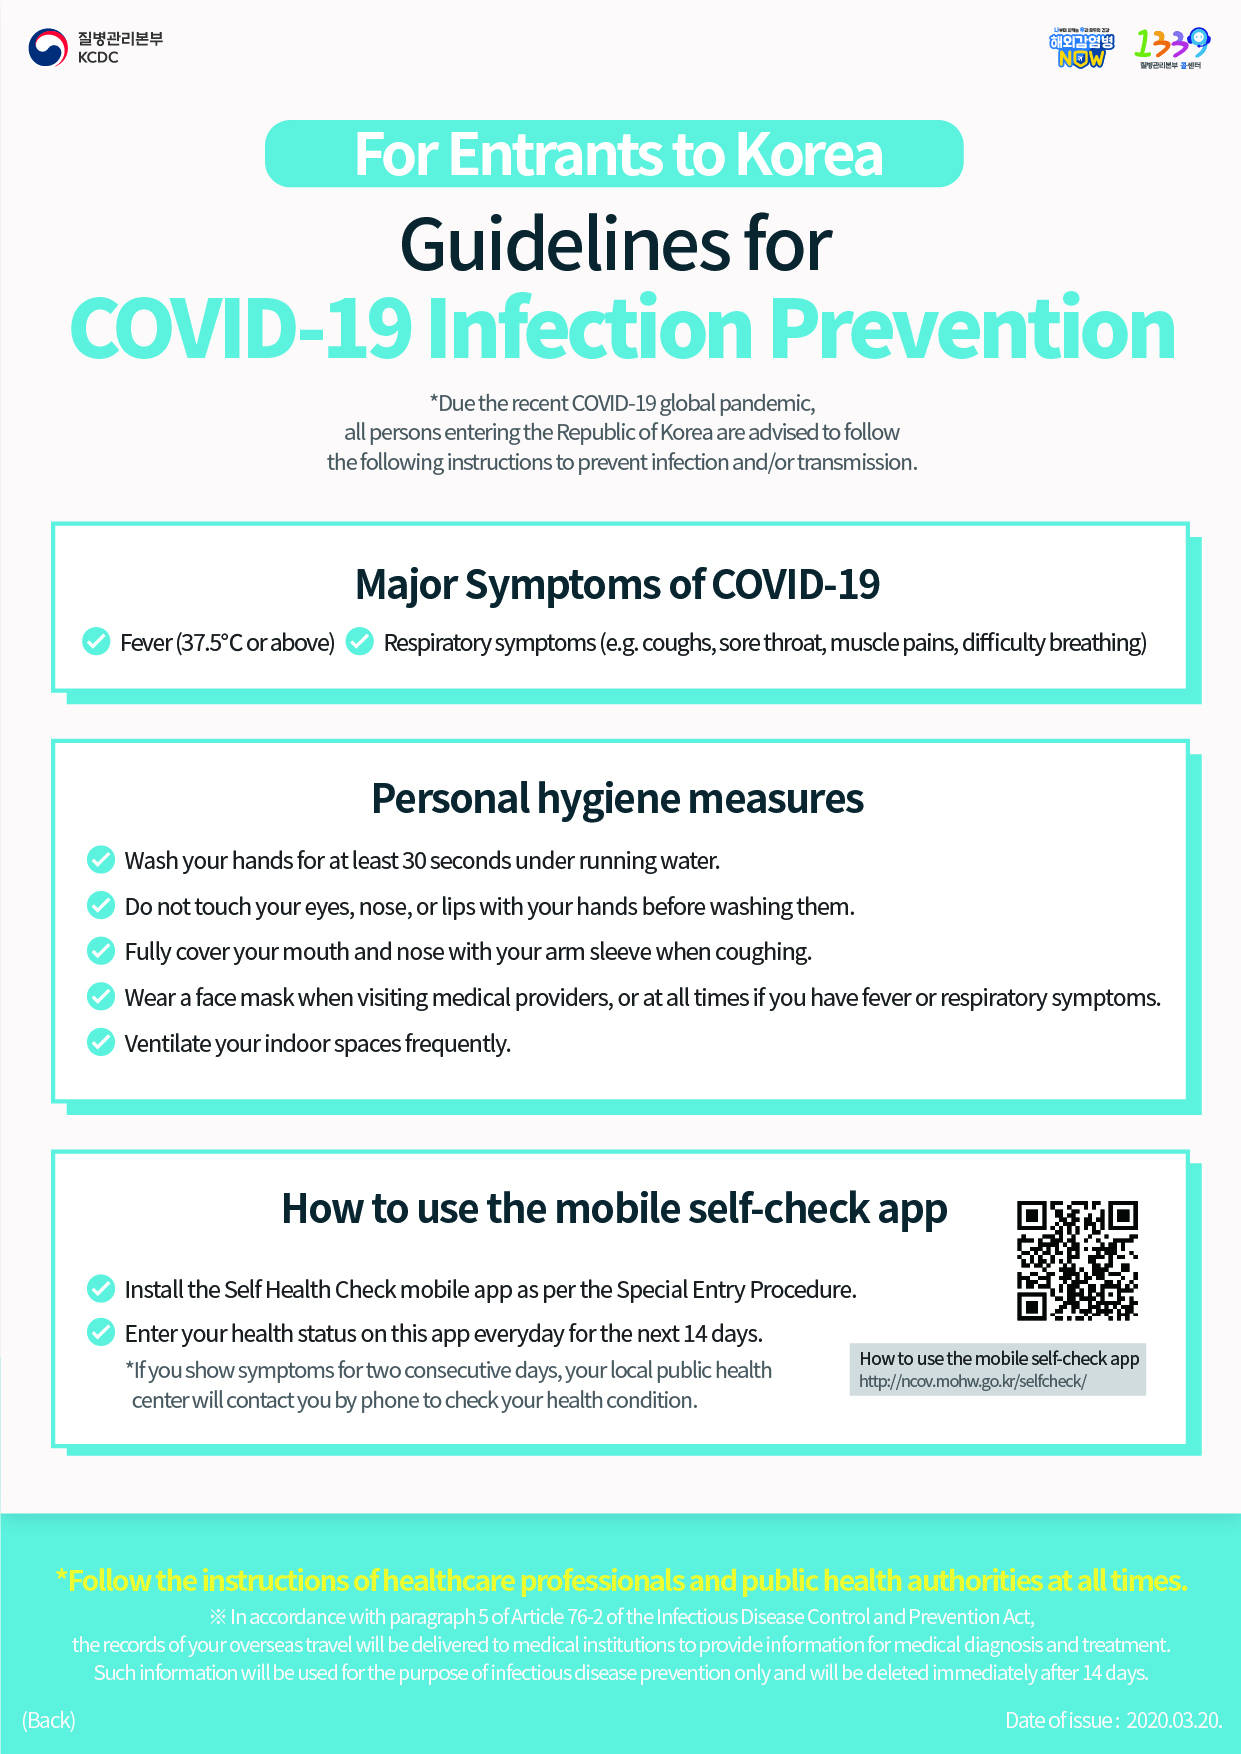 For Entrants to Korea Guidelines for COVID-19 Infection Prevention